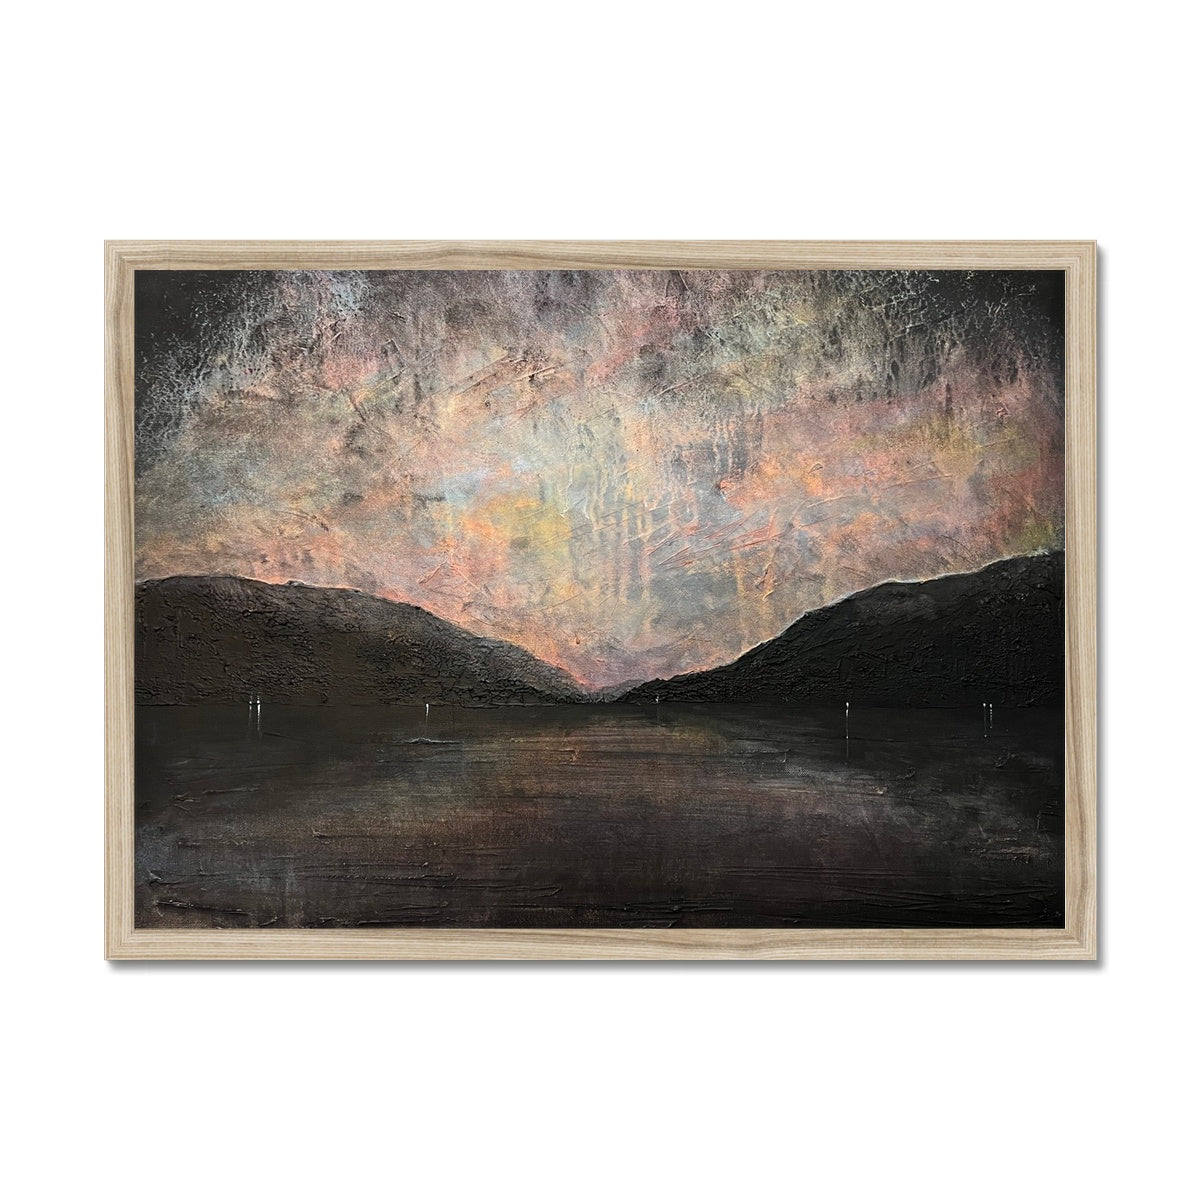 A Brooding Loch Lomond Painting | Framed Prints From Scotland-Framed Prints-Scottish Lochs & Mountains Art Gallery-A2 Landscape-Natural Frame-Paintings, Prints, Homeware, Art Gifts From Scotland By Scottish Artist Kevin Hunter